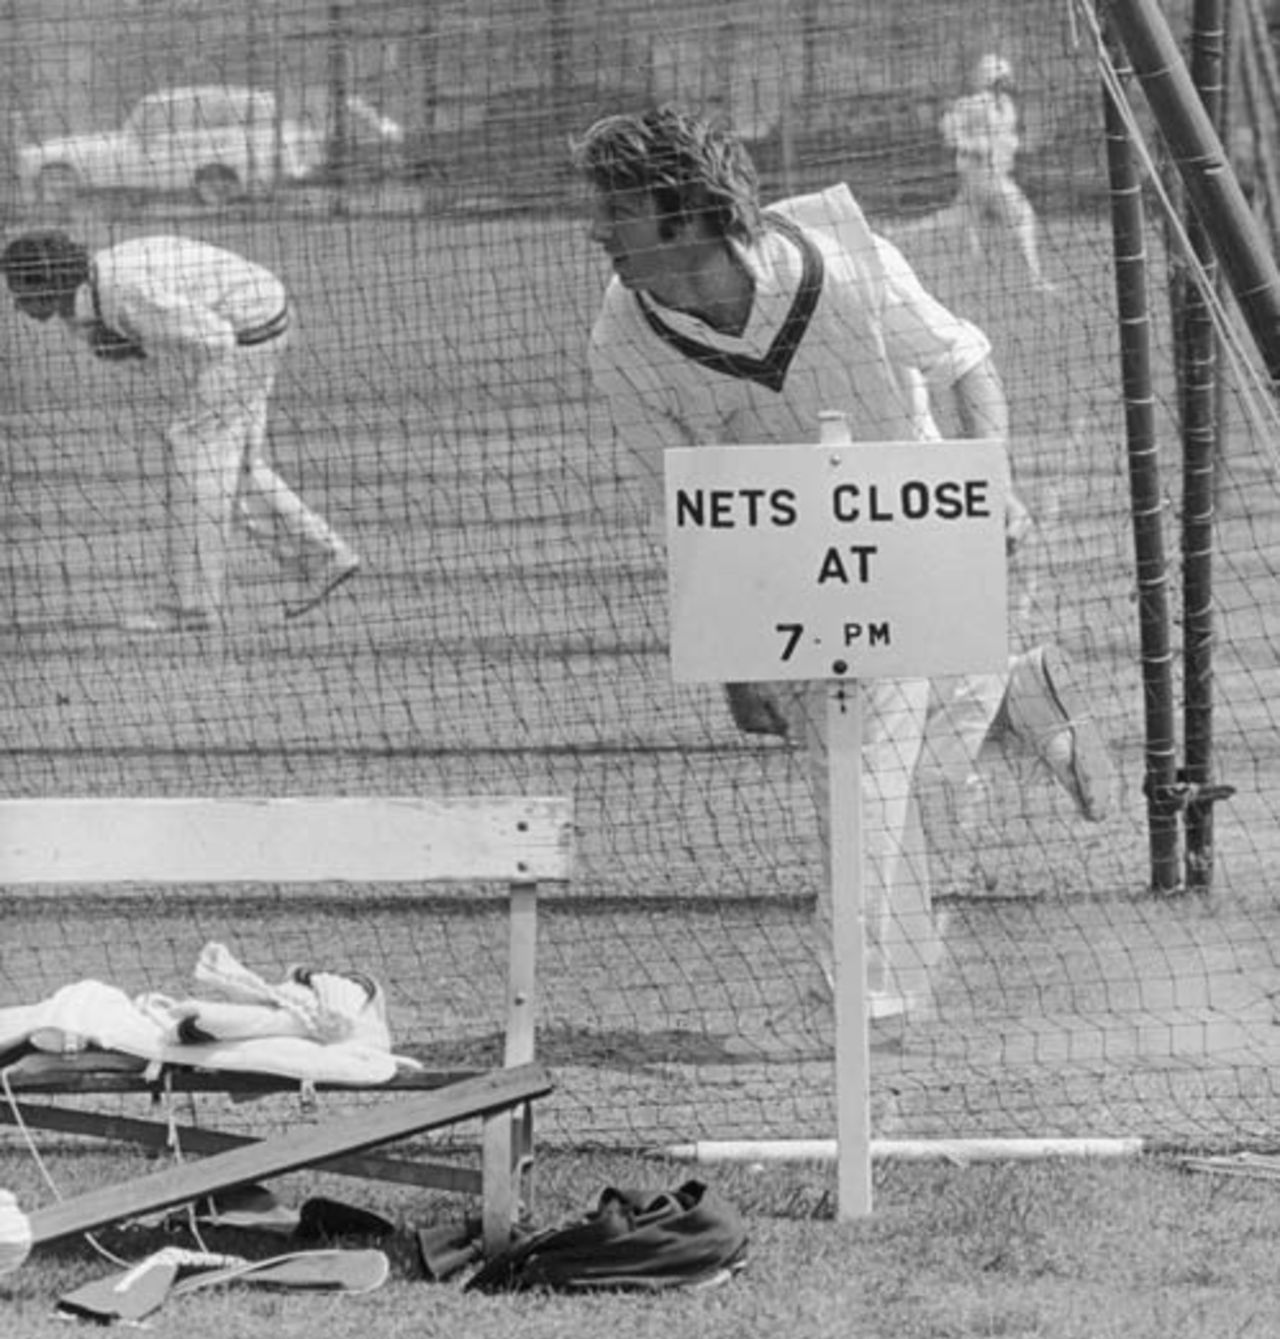 Jeff Thomson in the nets, Lord's, June 10, 1975